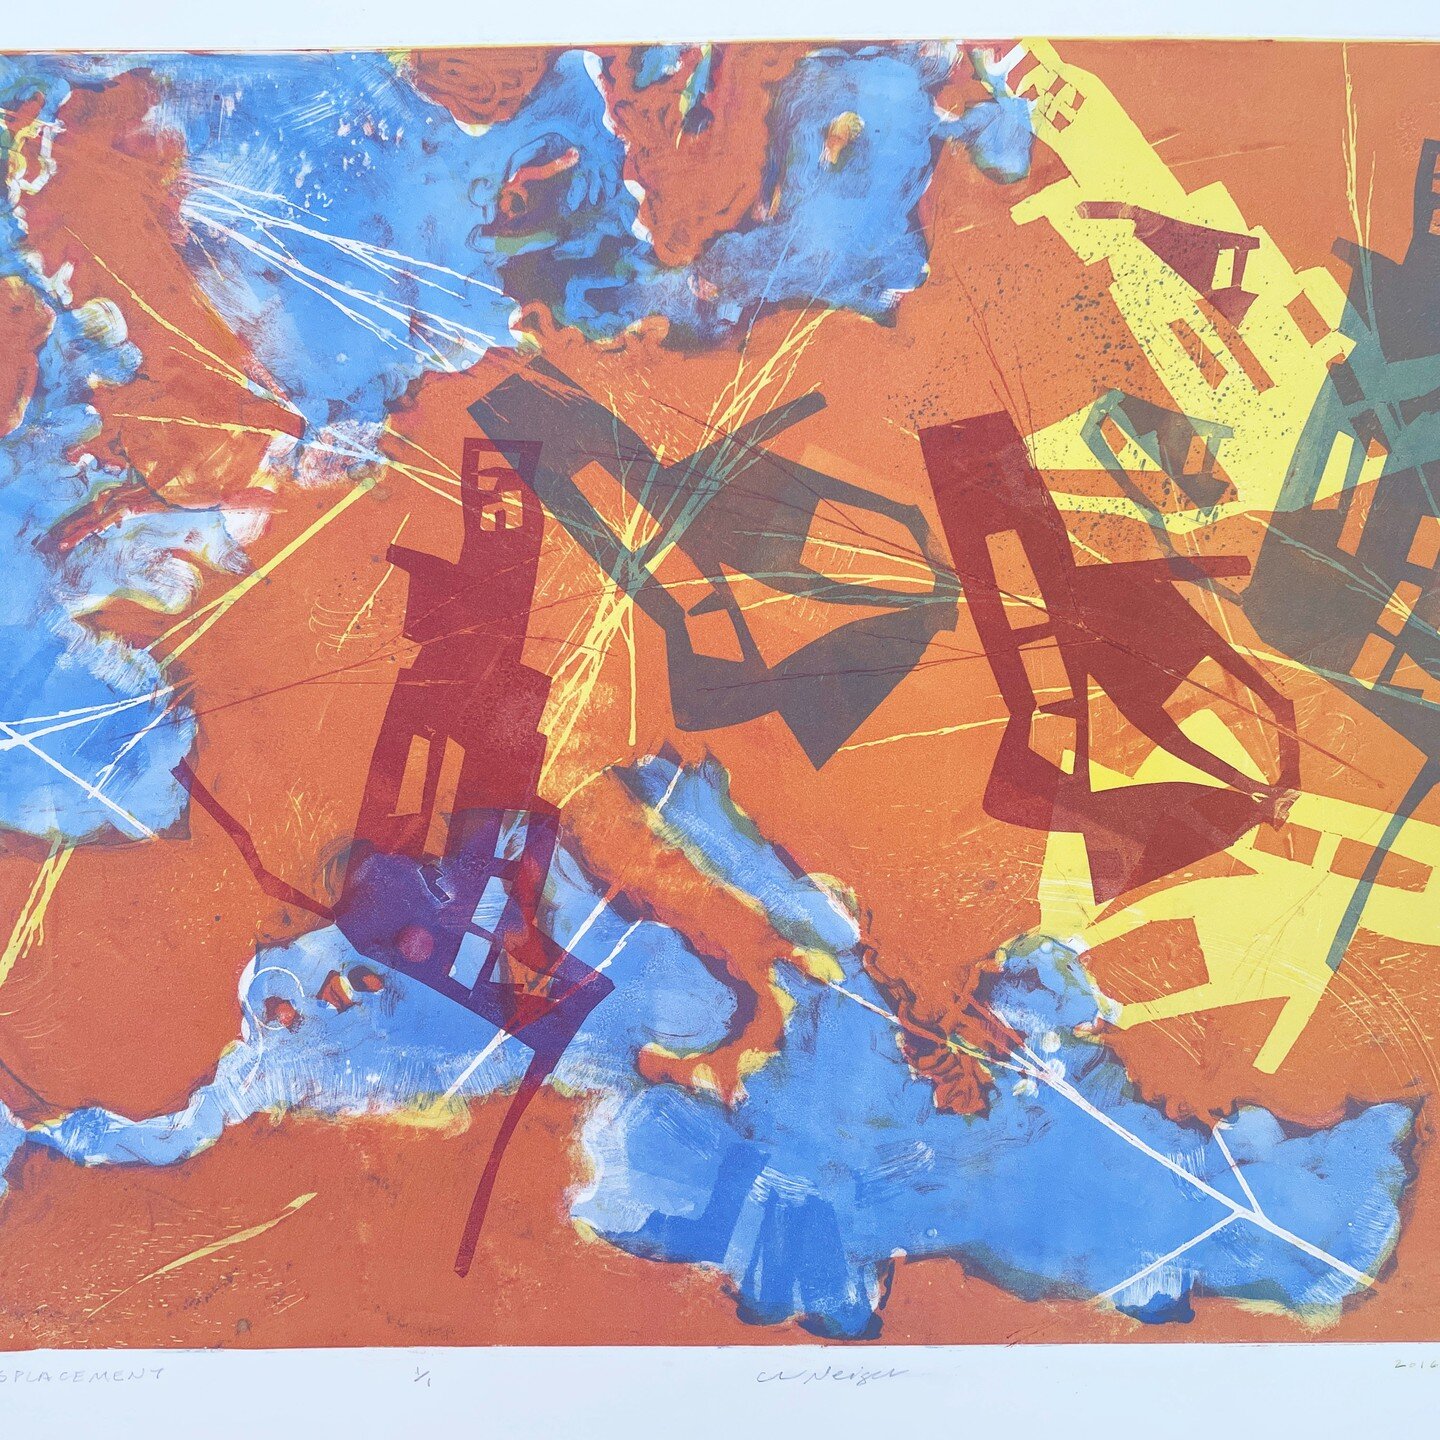 &quot;Displacement&quot; 
Monoprint
1/1
34&quot; x 32&quot;

From my Diaspora series &mdash;I forgot about it and found it in my flat files when I was looking for something else. I just added it to my website. To see more of the Diaspora series and r